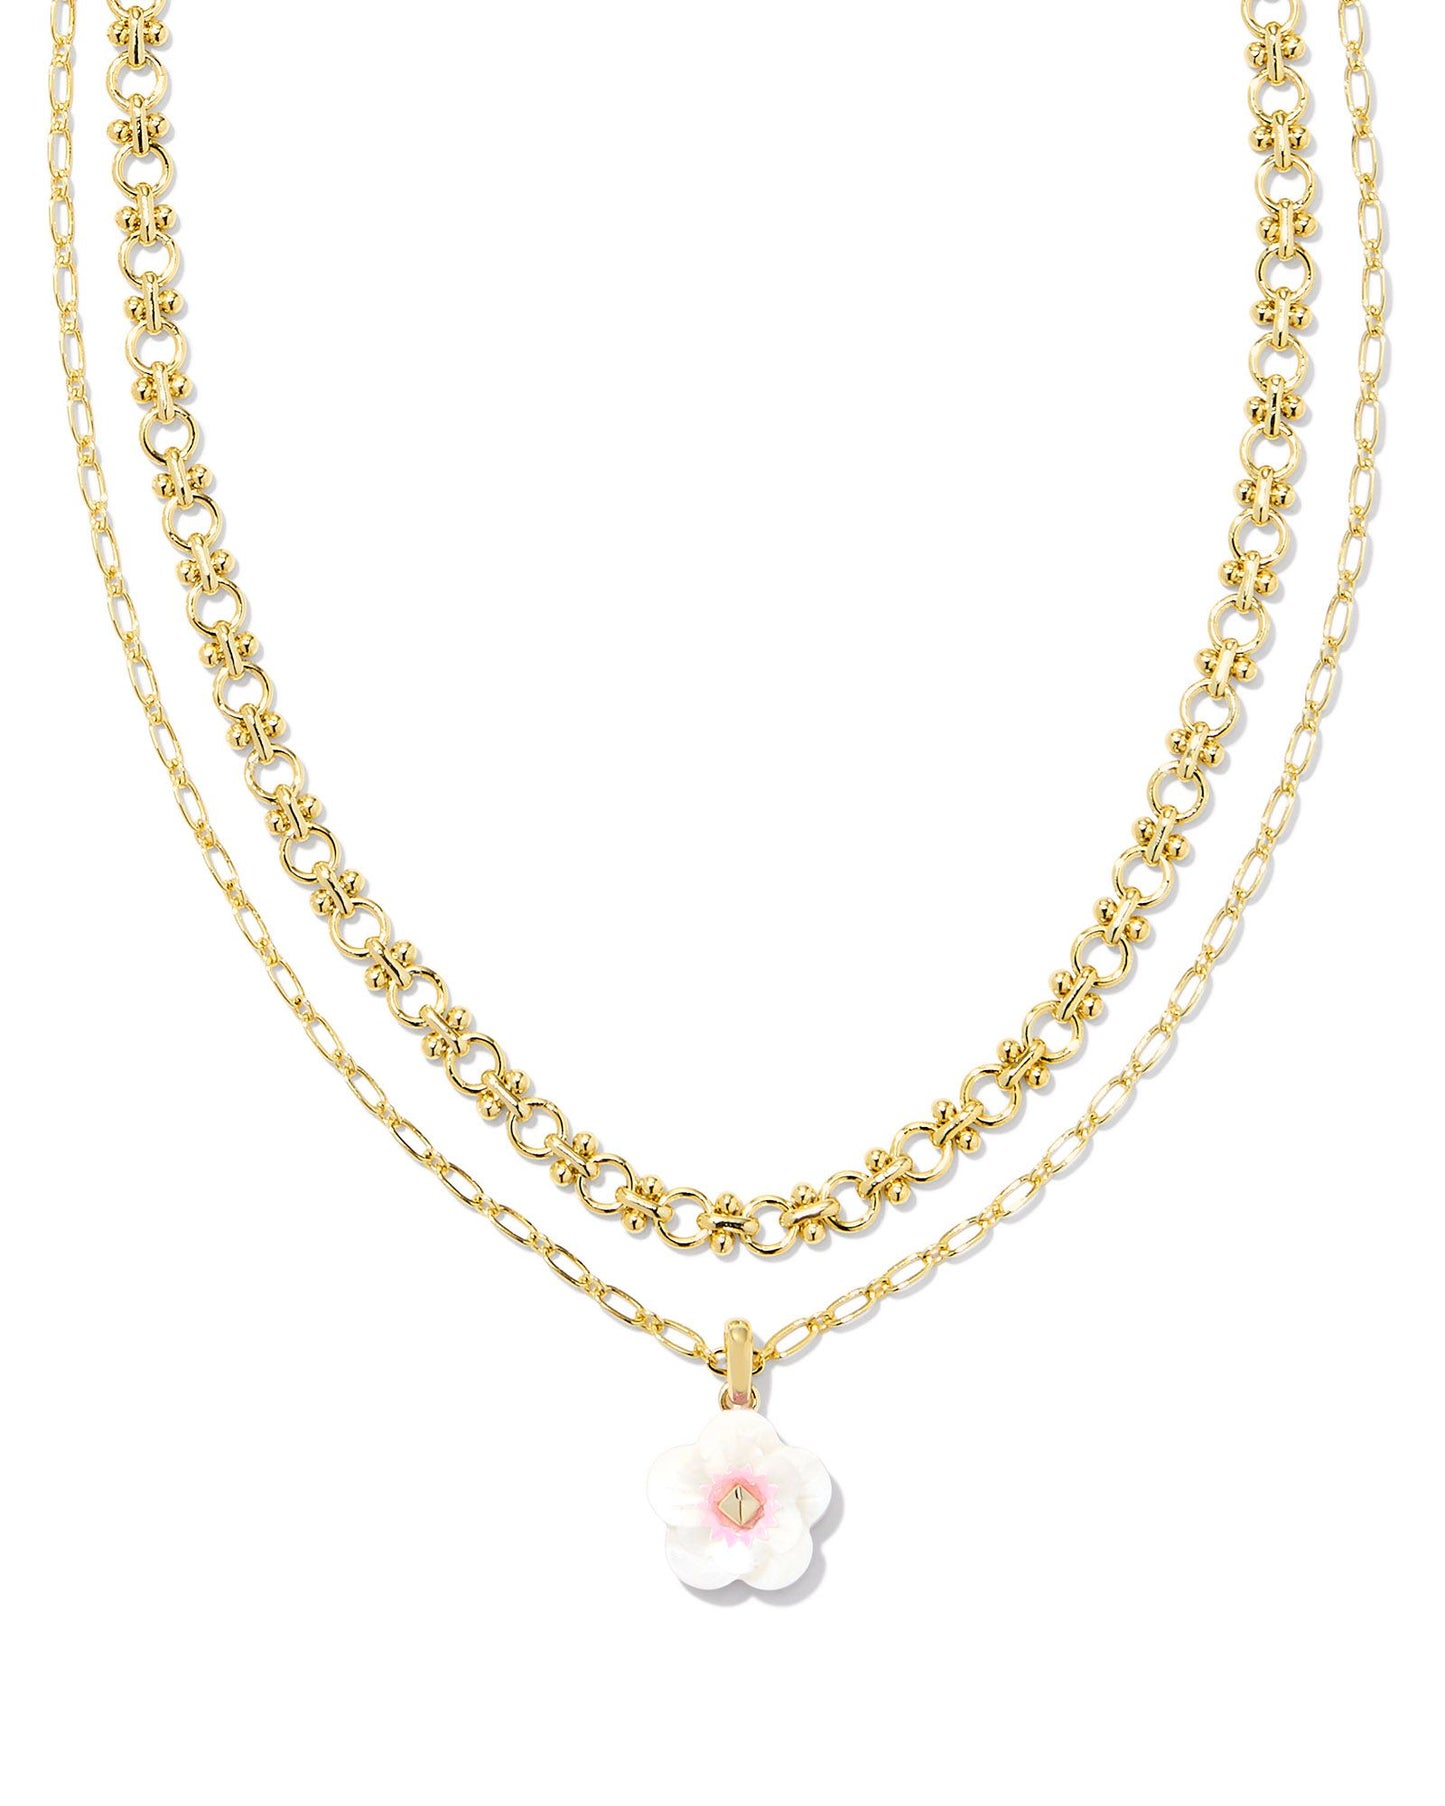 Kendra Scott- Deliah Gold Multi Strand Necklace in Iridescent Pink White Mix